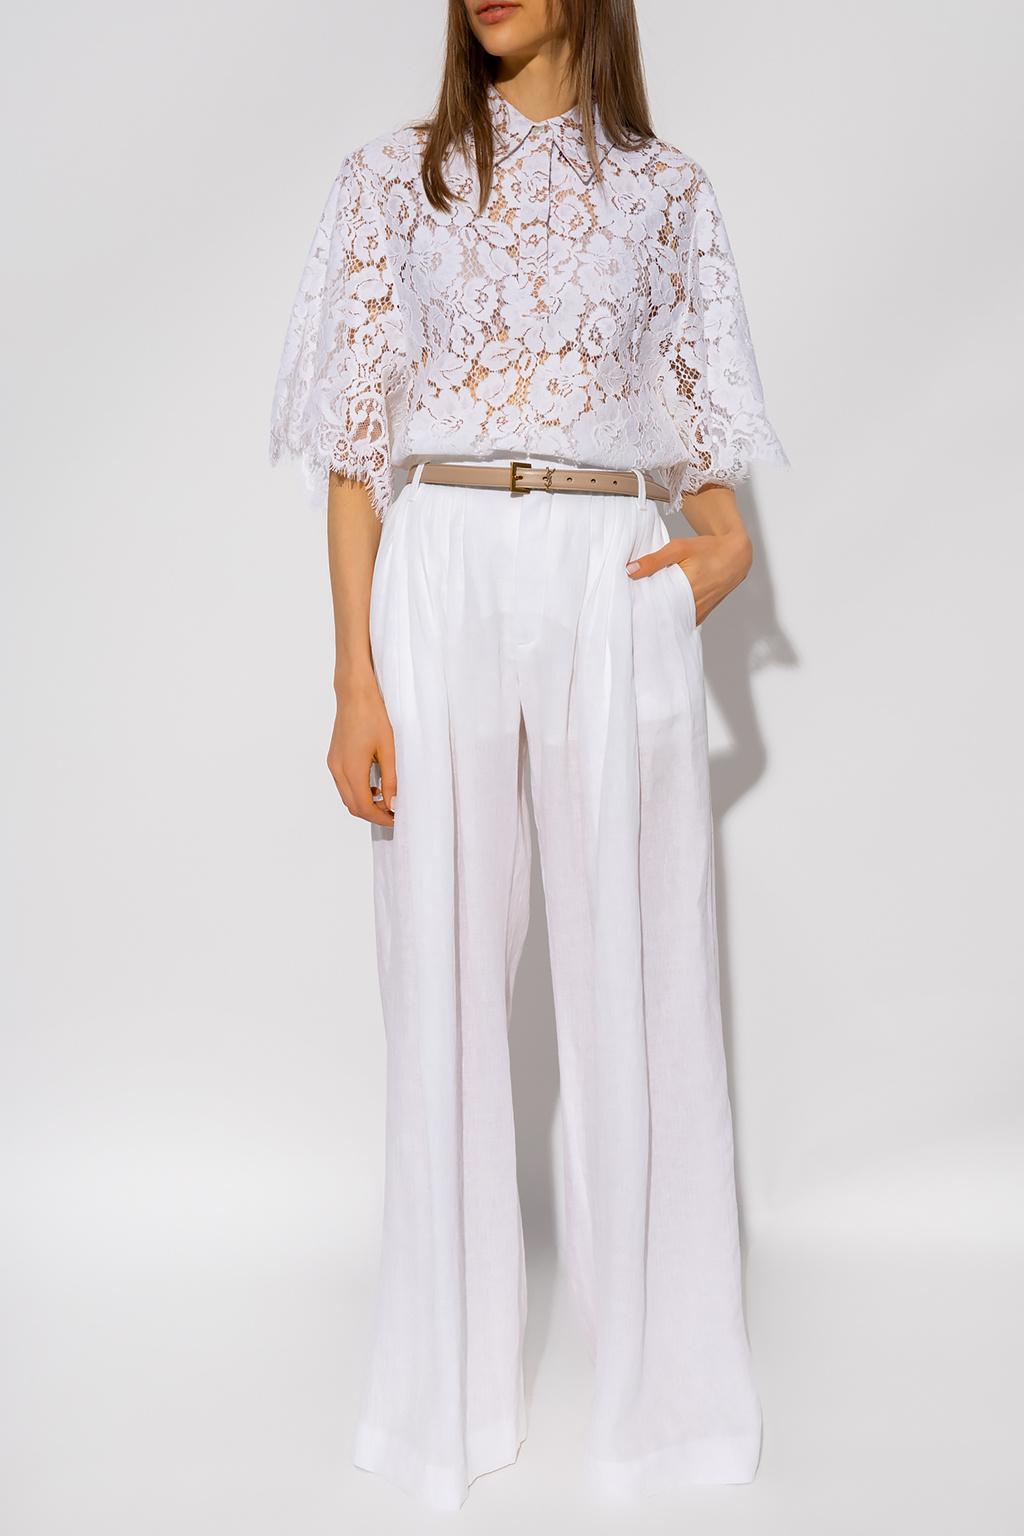 Michael Kors Floral Lace Shirt in White | Lyst